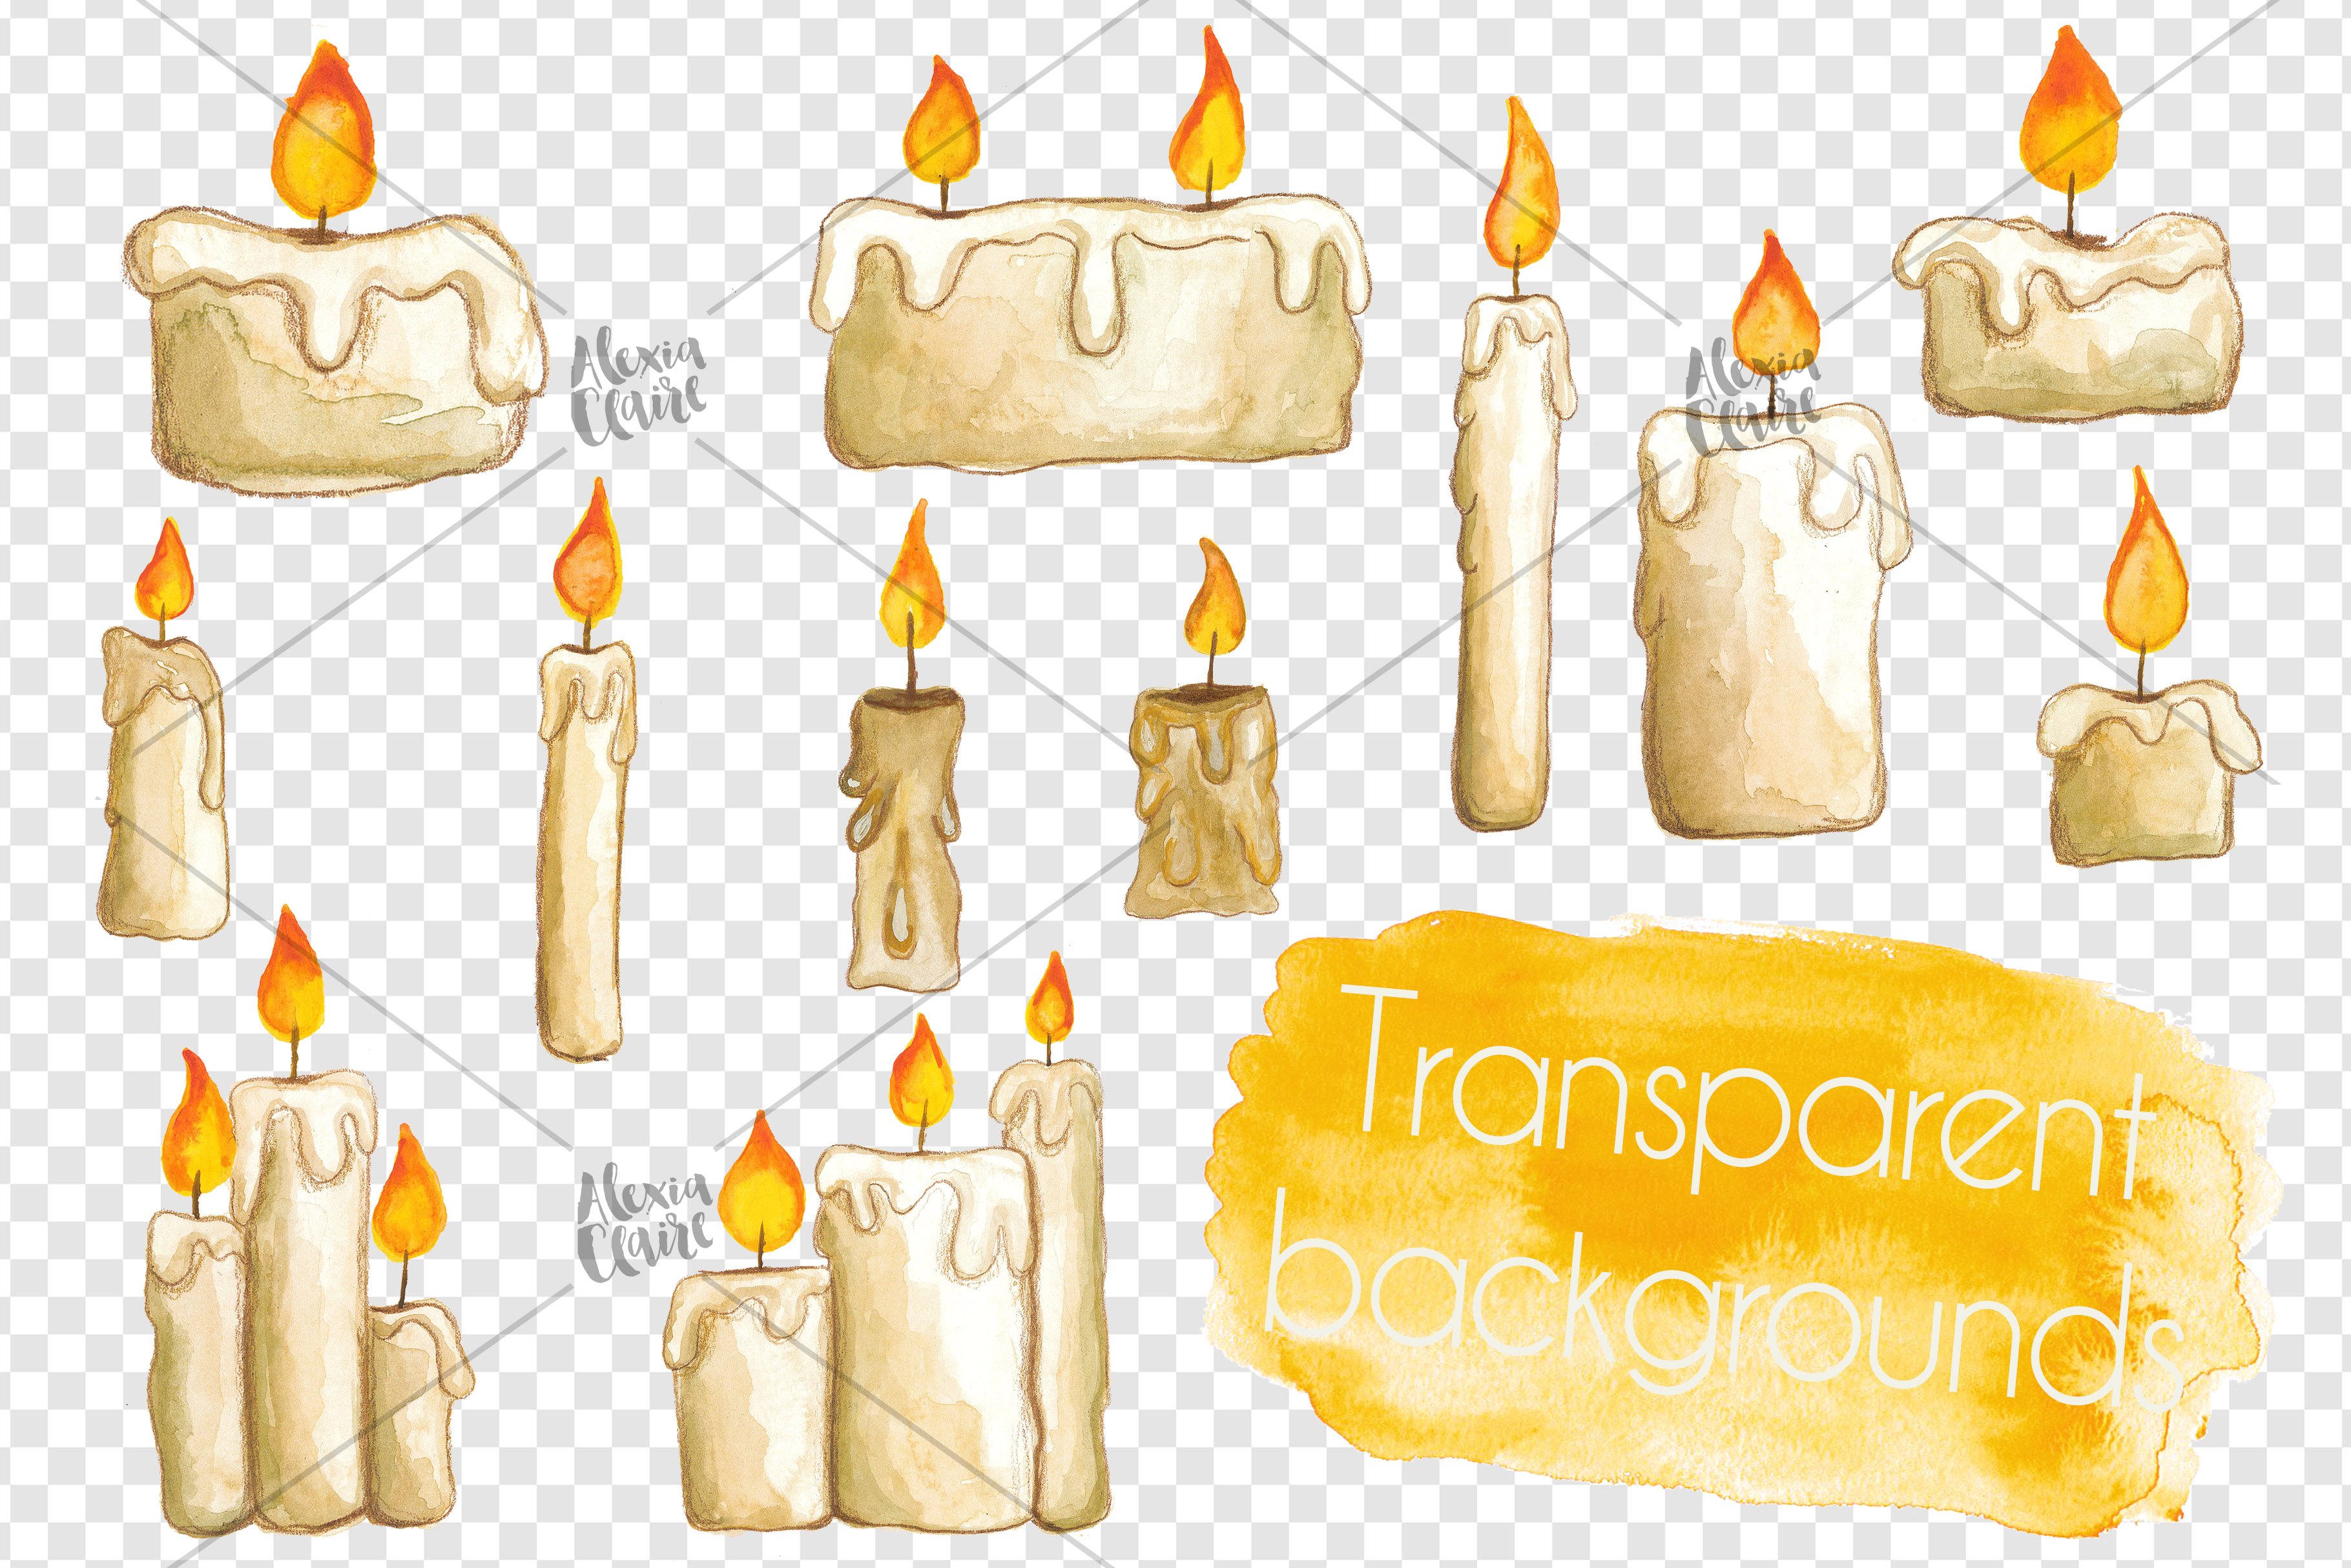 3 candles clipart 844